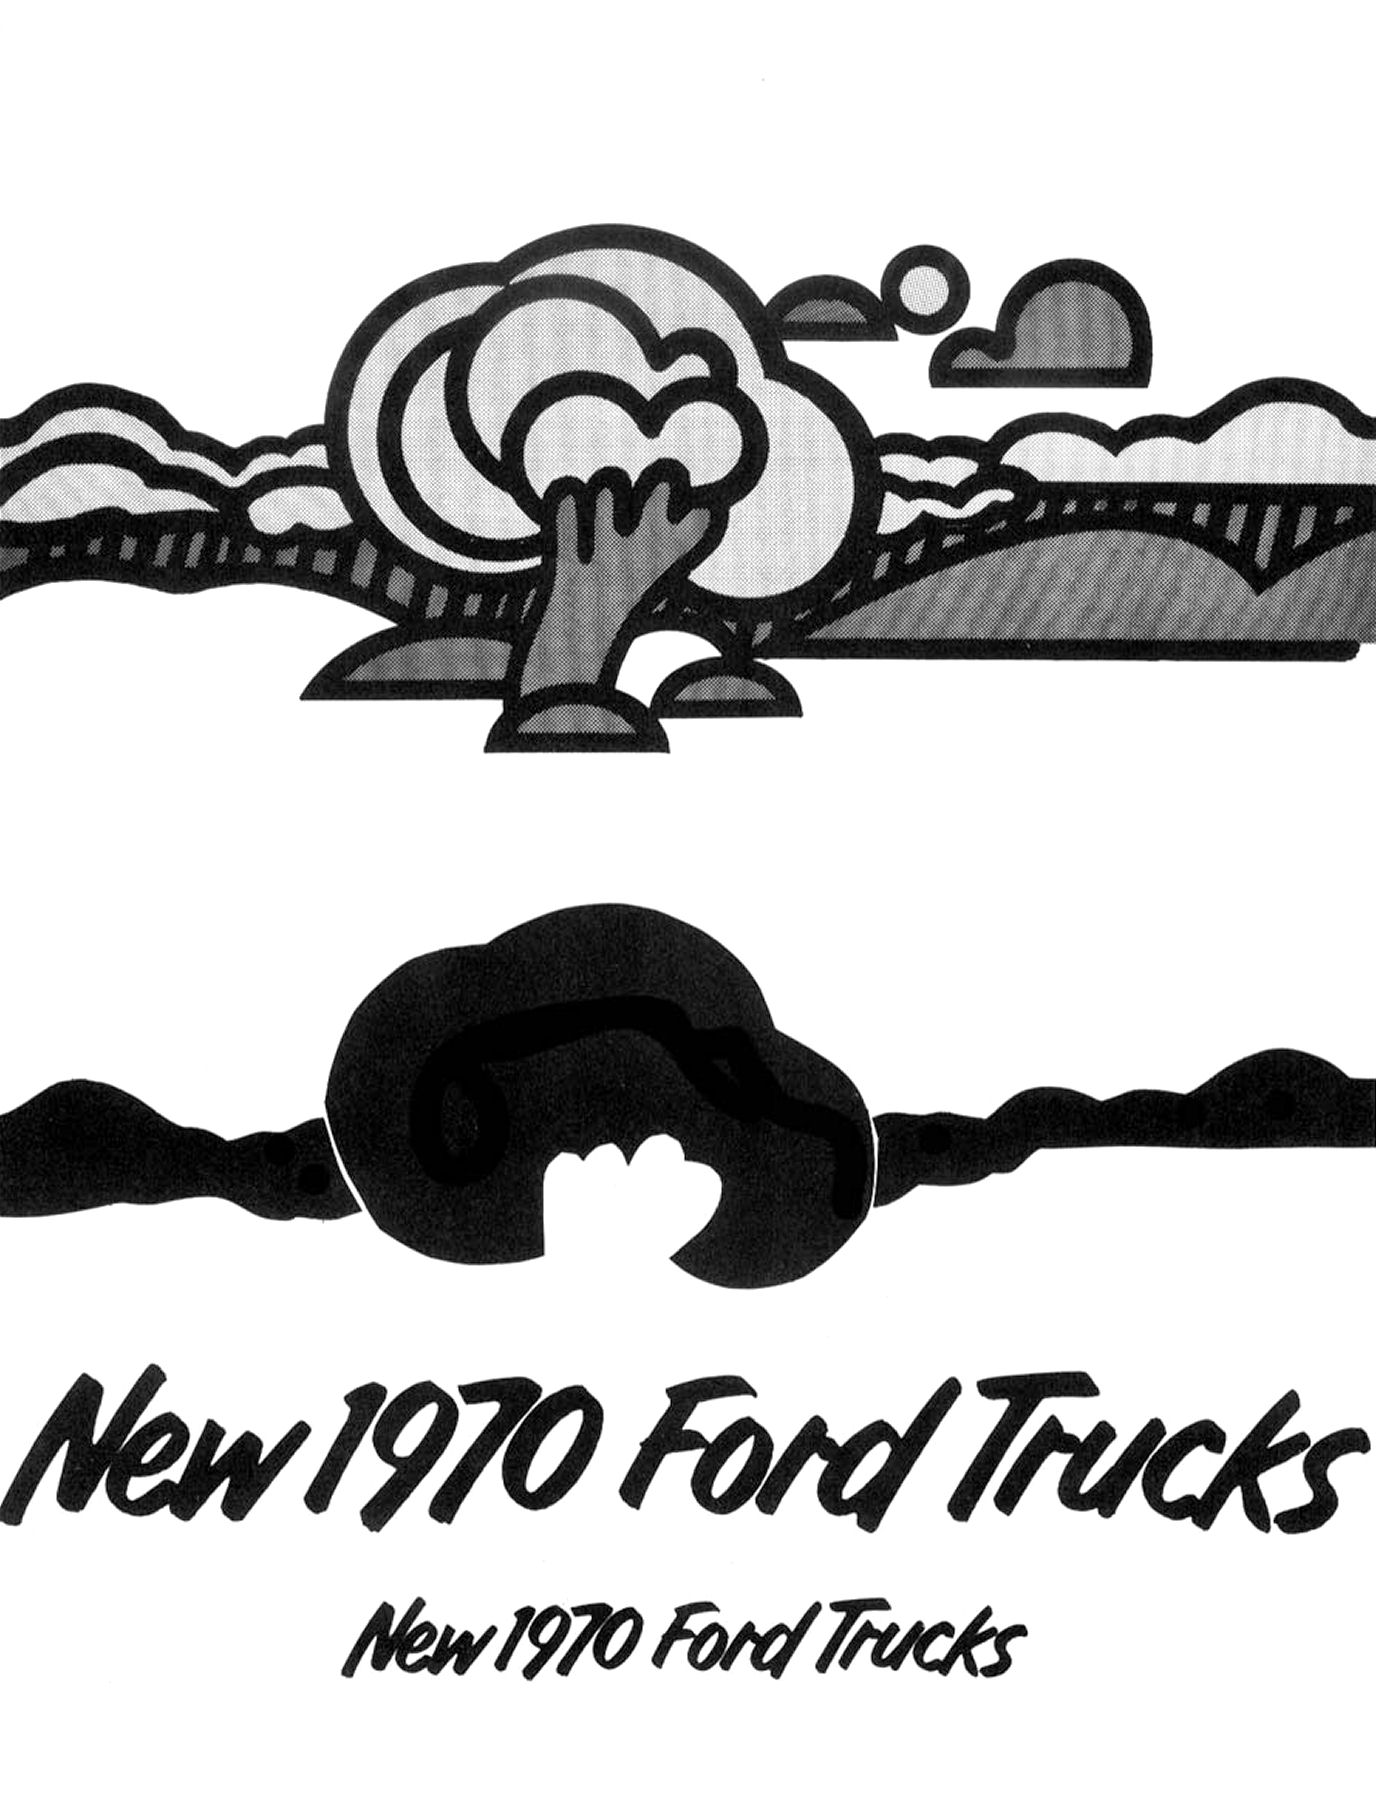 1970 Ford Truck Ad Clipart Book-26